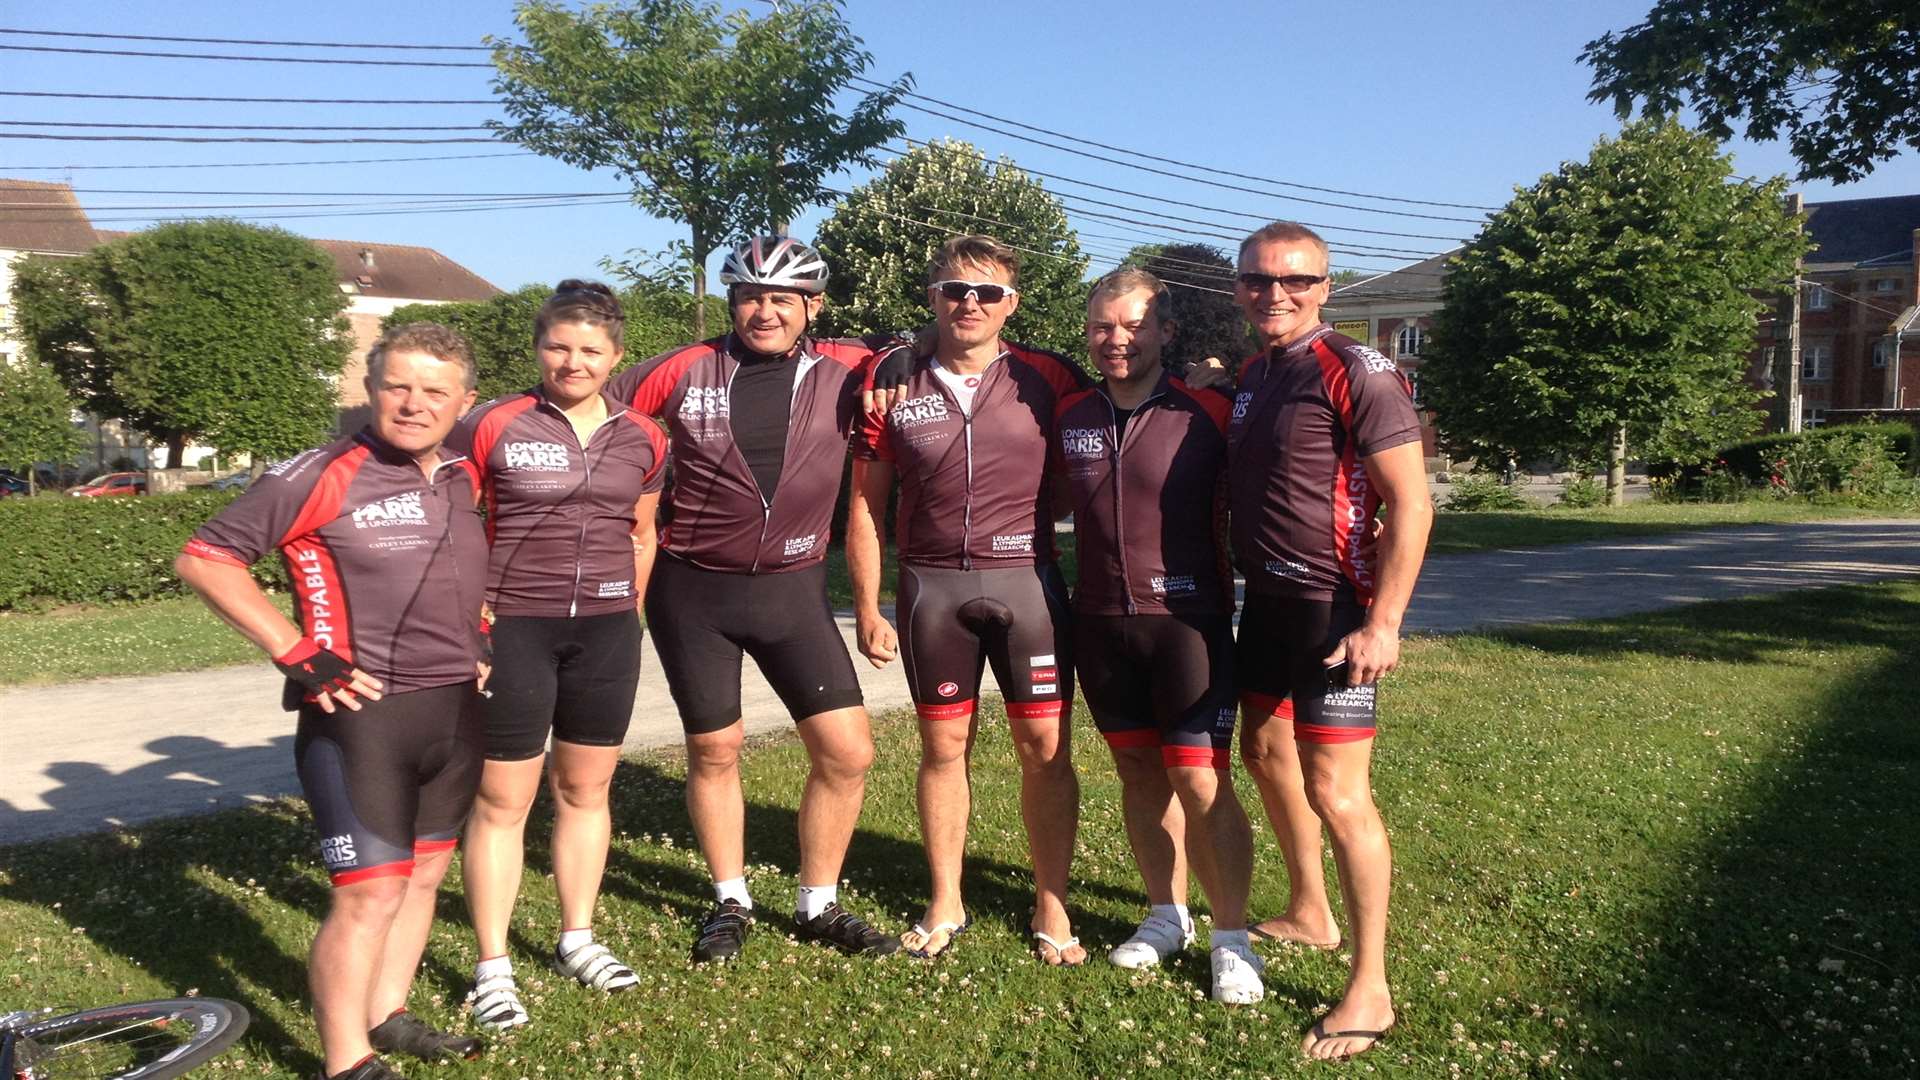 Bough Beech resident Paul Hitchcott (far left) cycled 500km from London to Paris in aid of a blood cancer charity